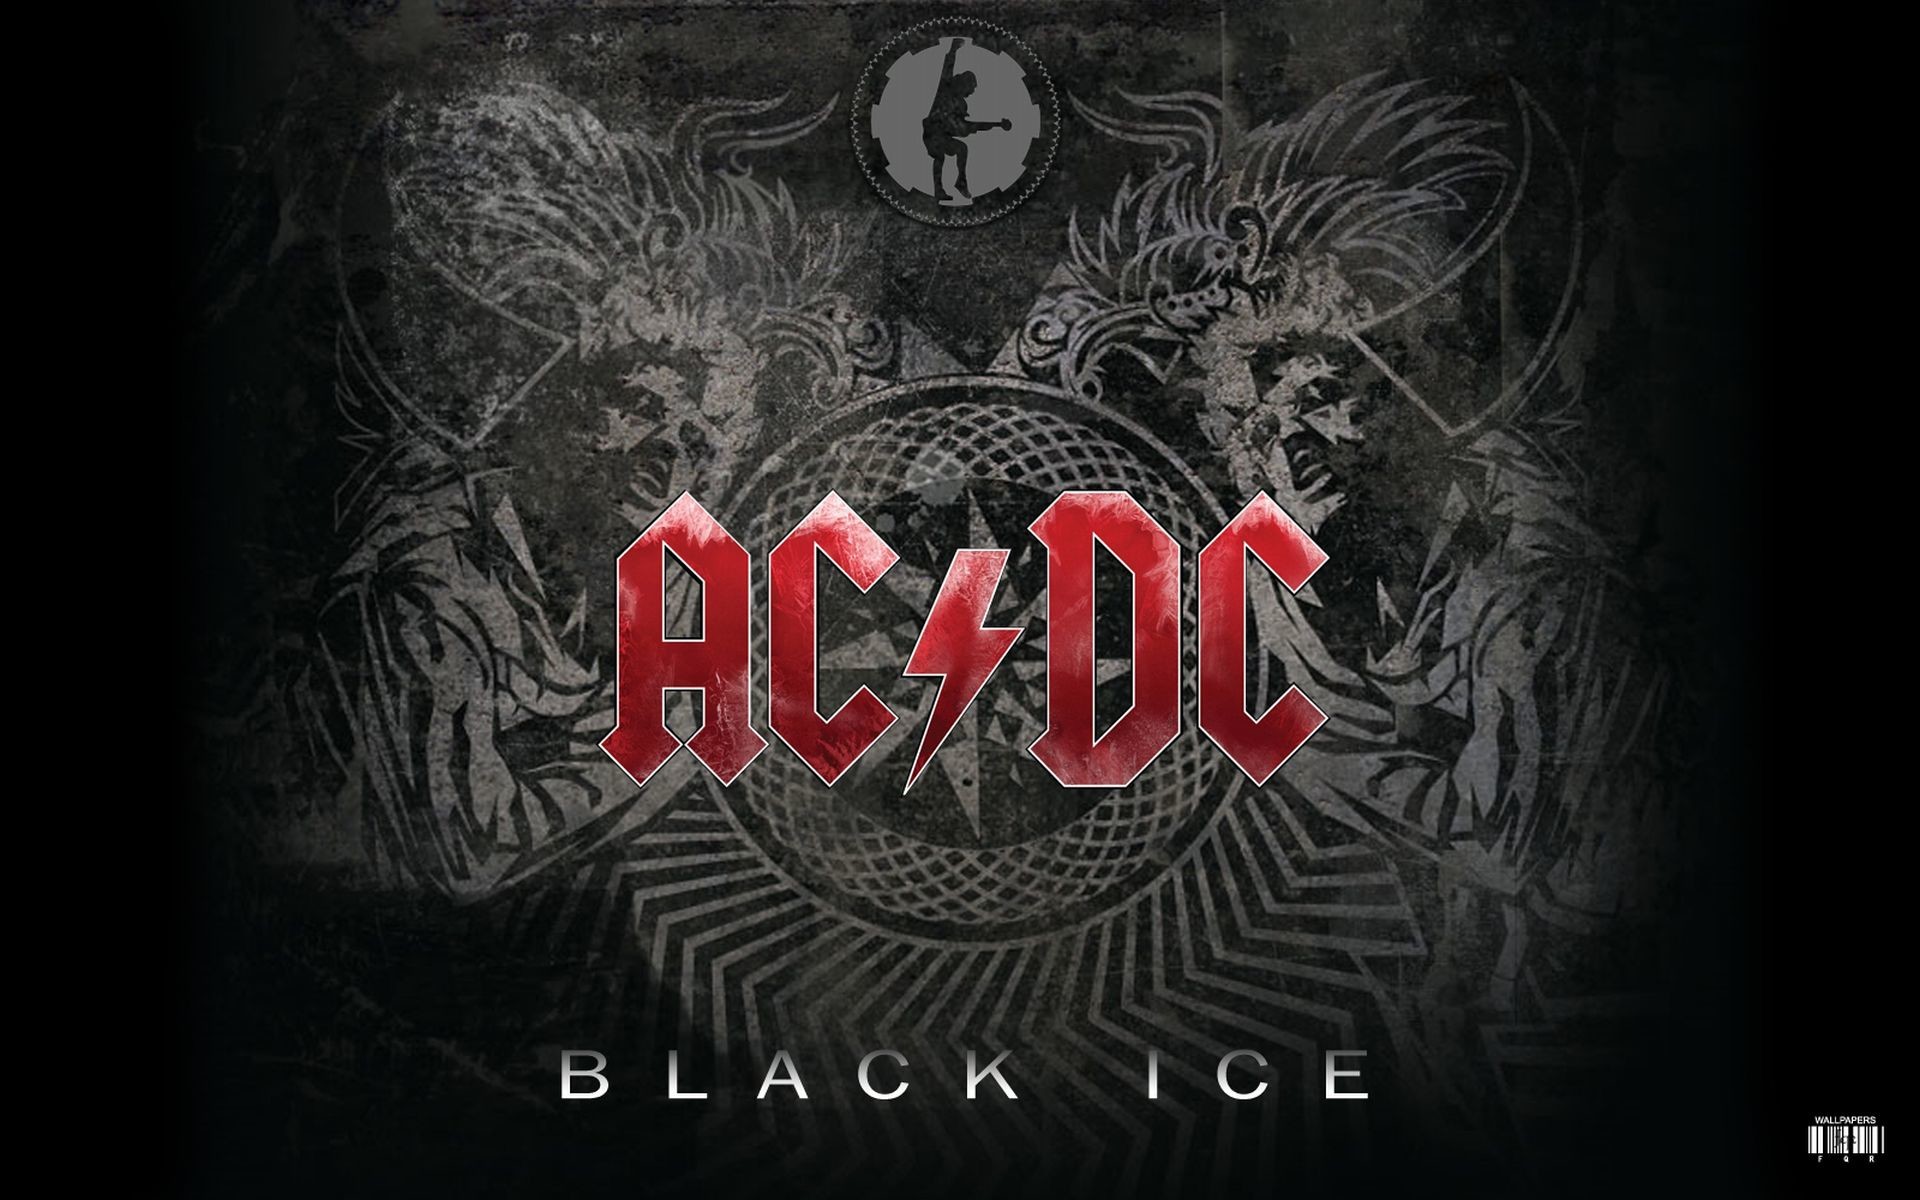 ac dc wallpaper iphone,text,black,font,graphic design,red